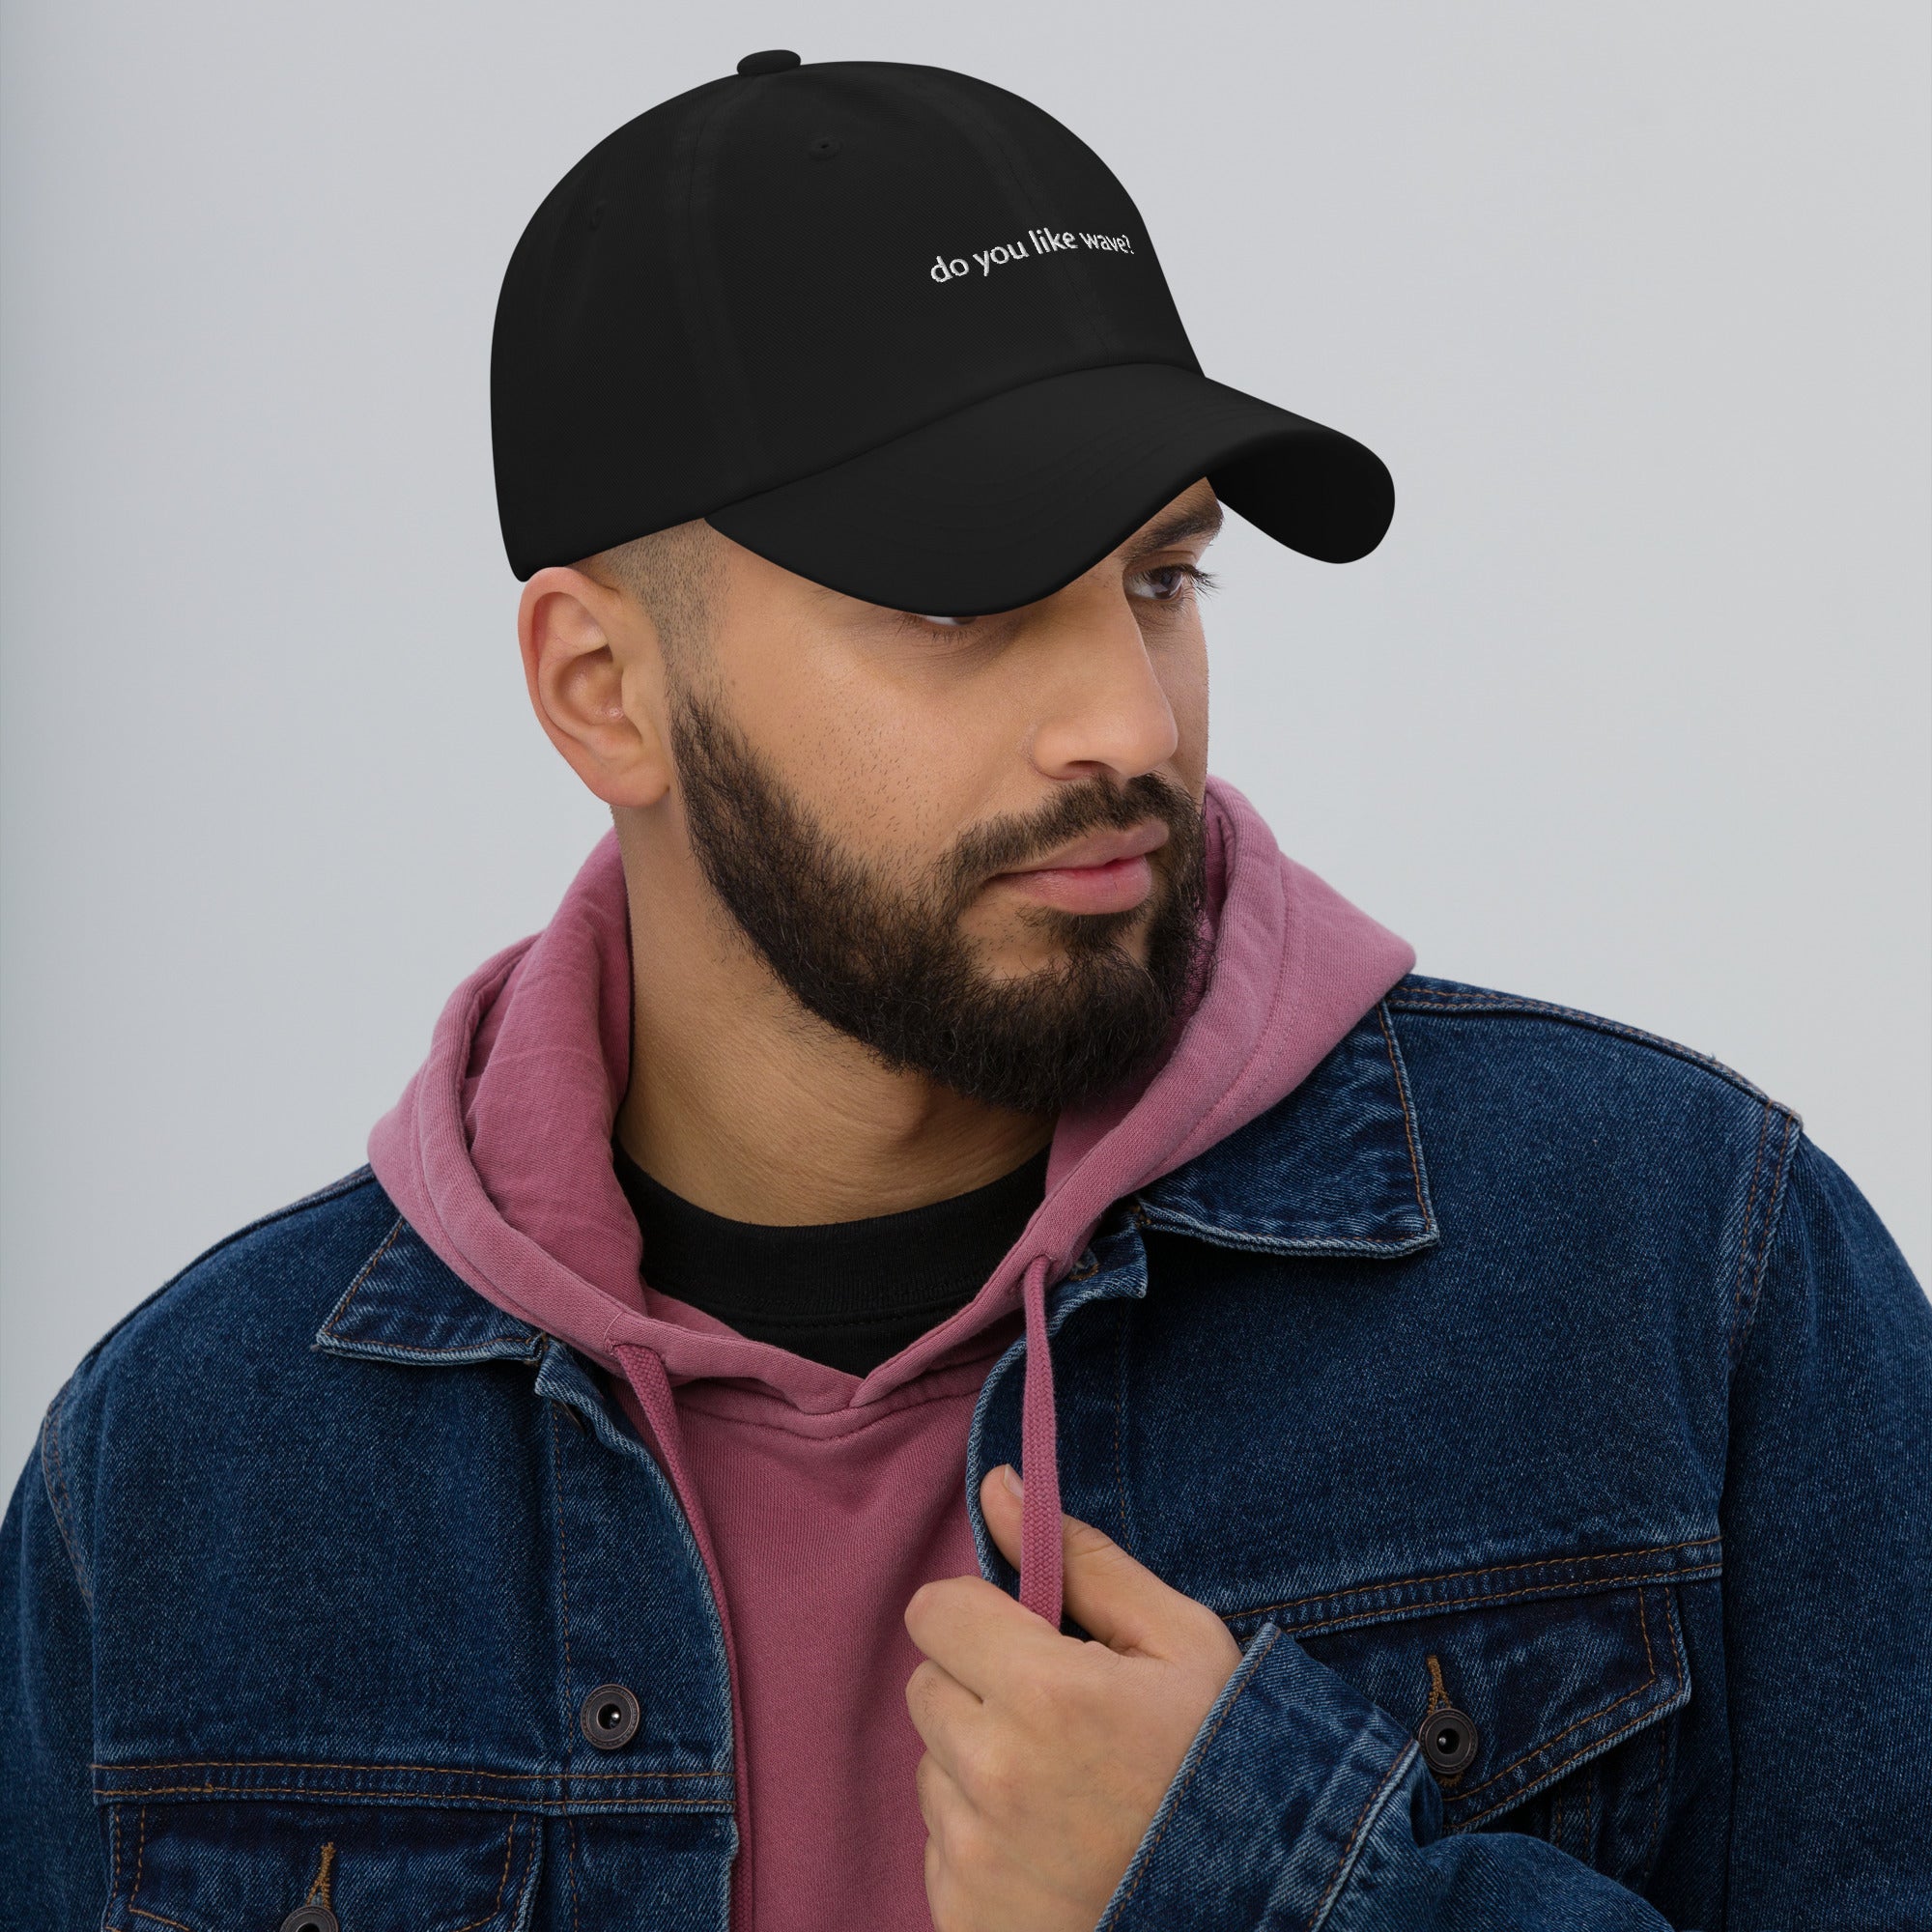 do you like wave? dad hat